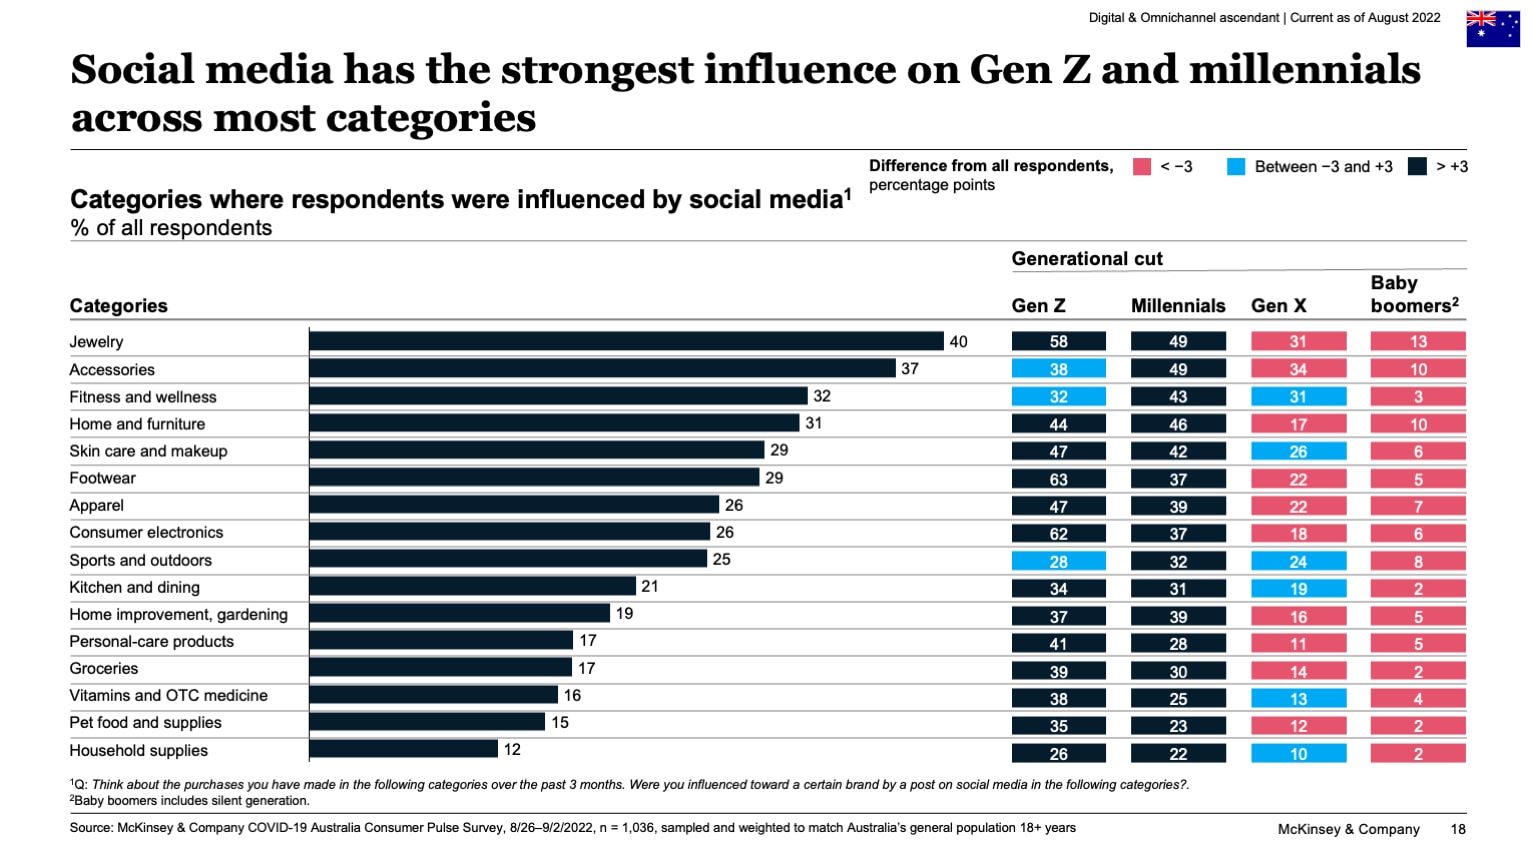 Social media has the strongest influence on Gen Z and millennials across most categories